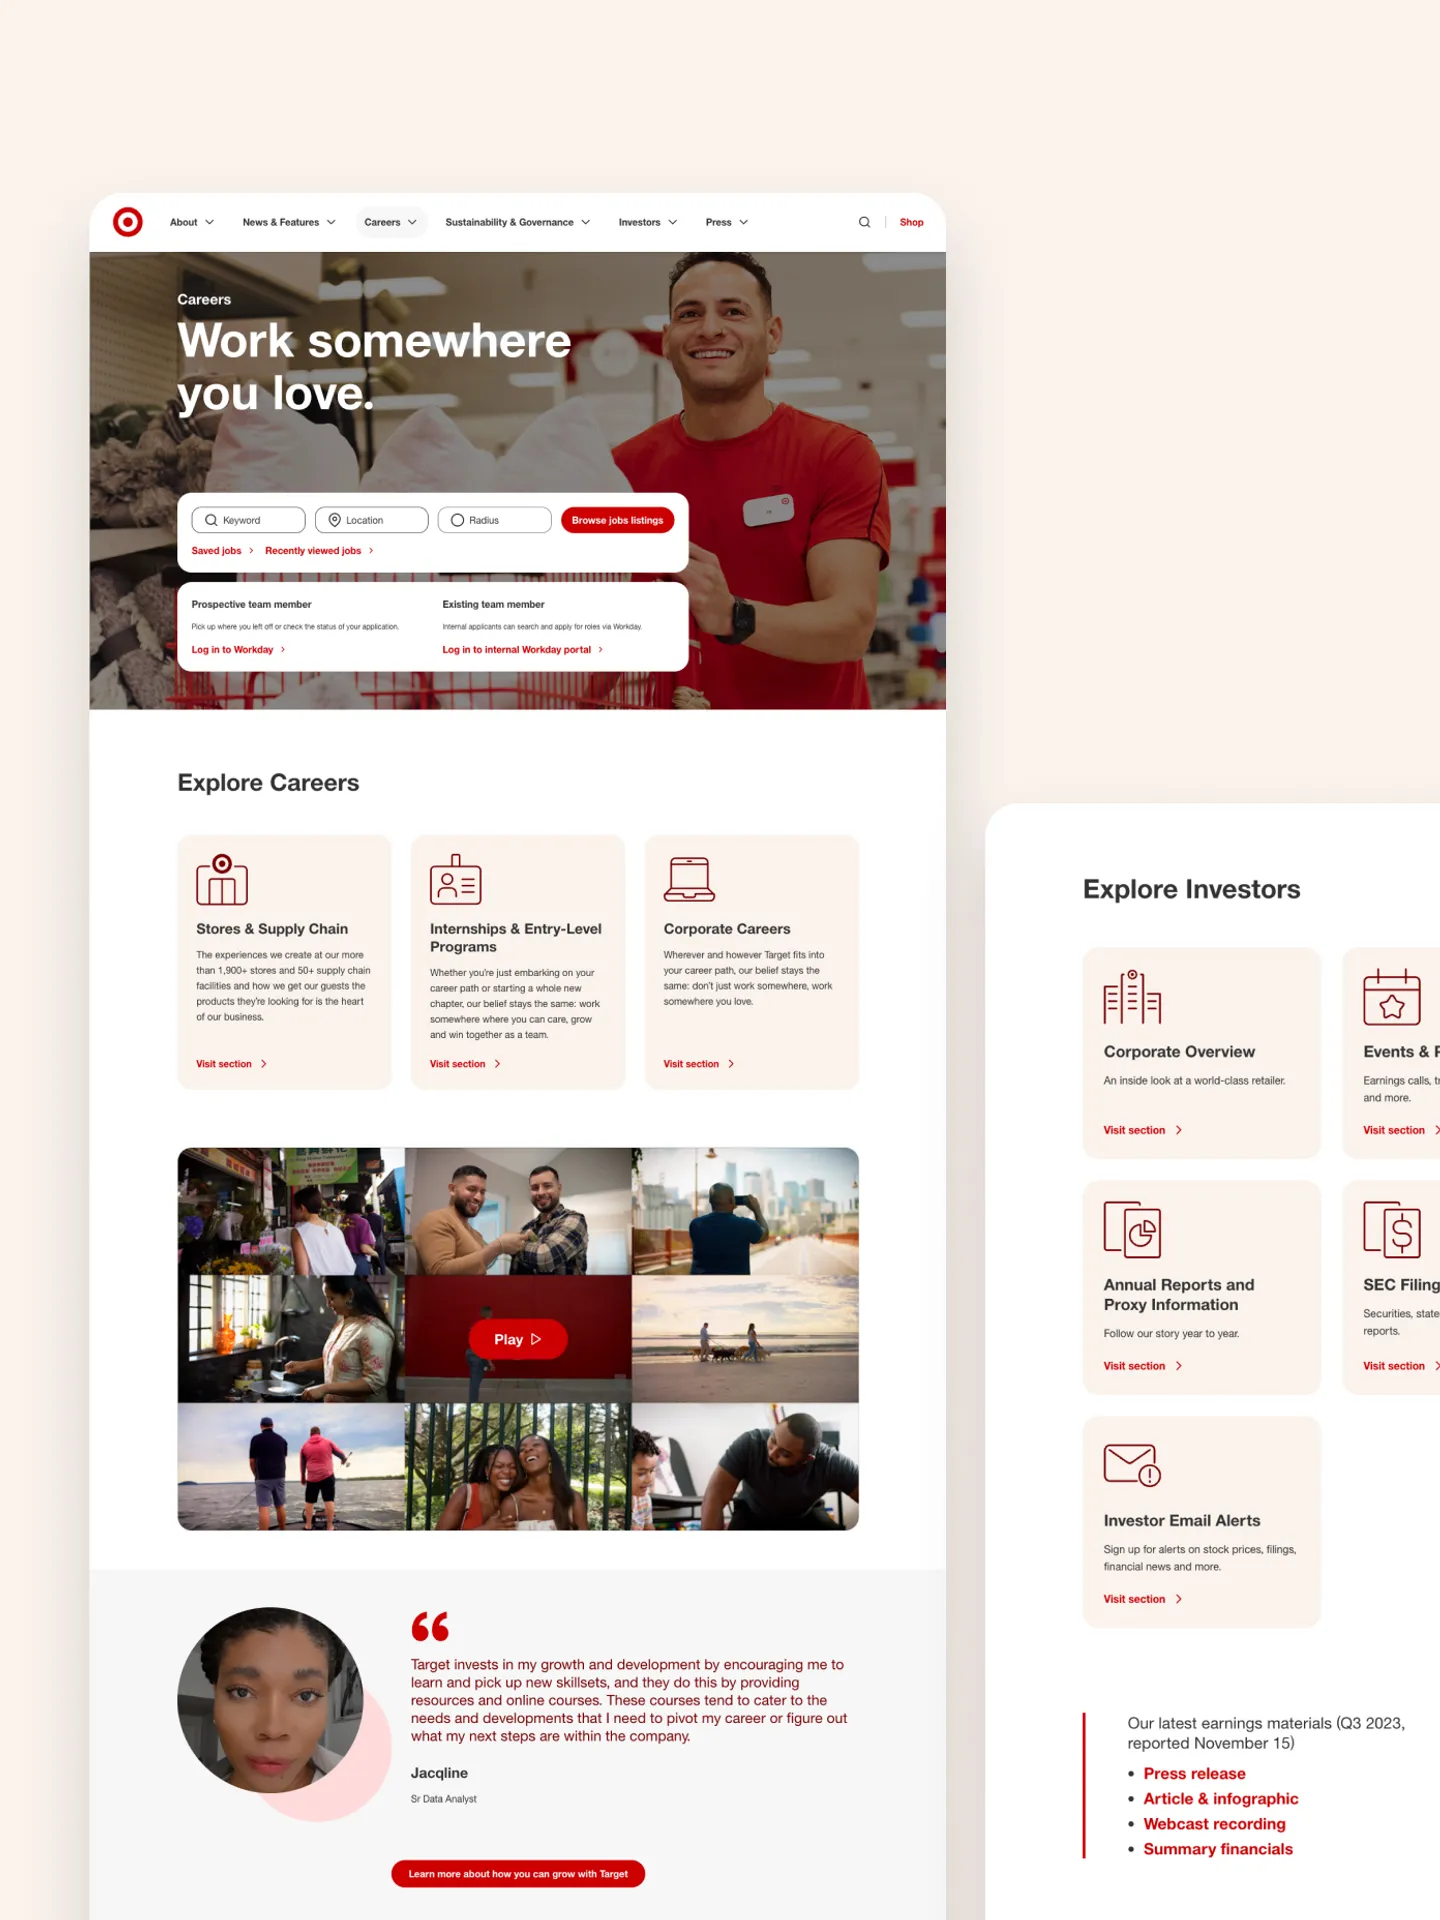 Composite image of page designs for the Target corporate website